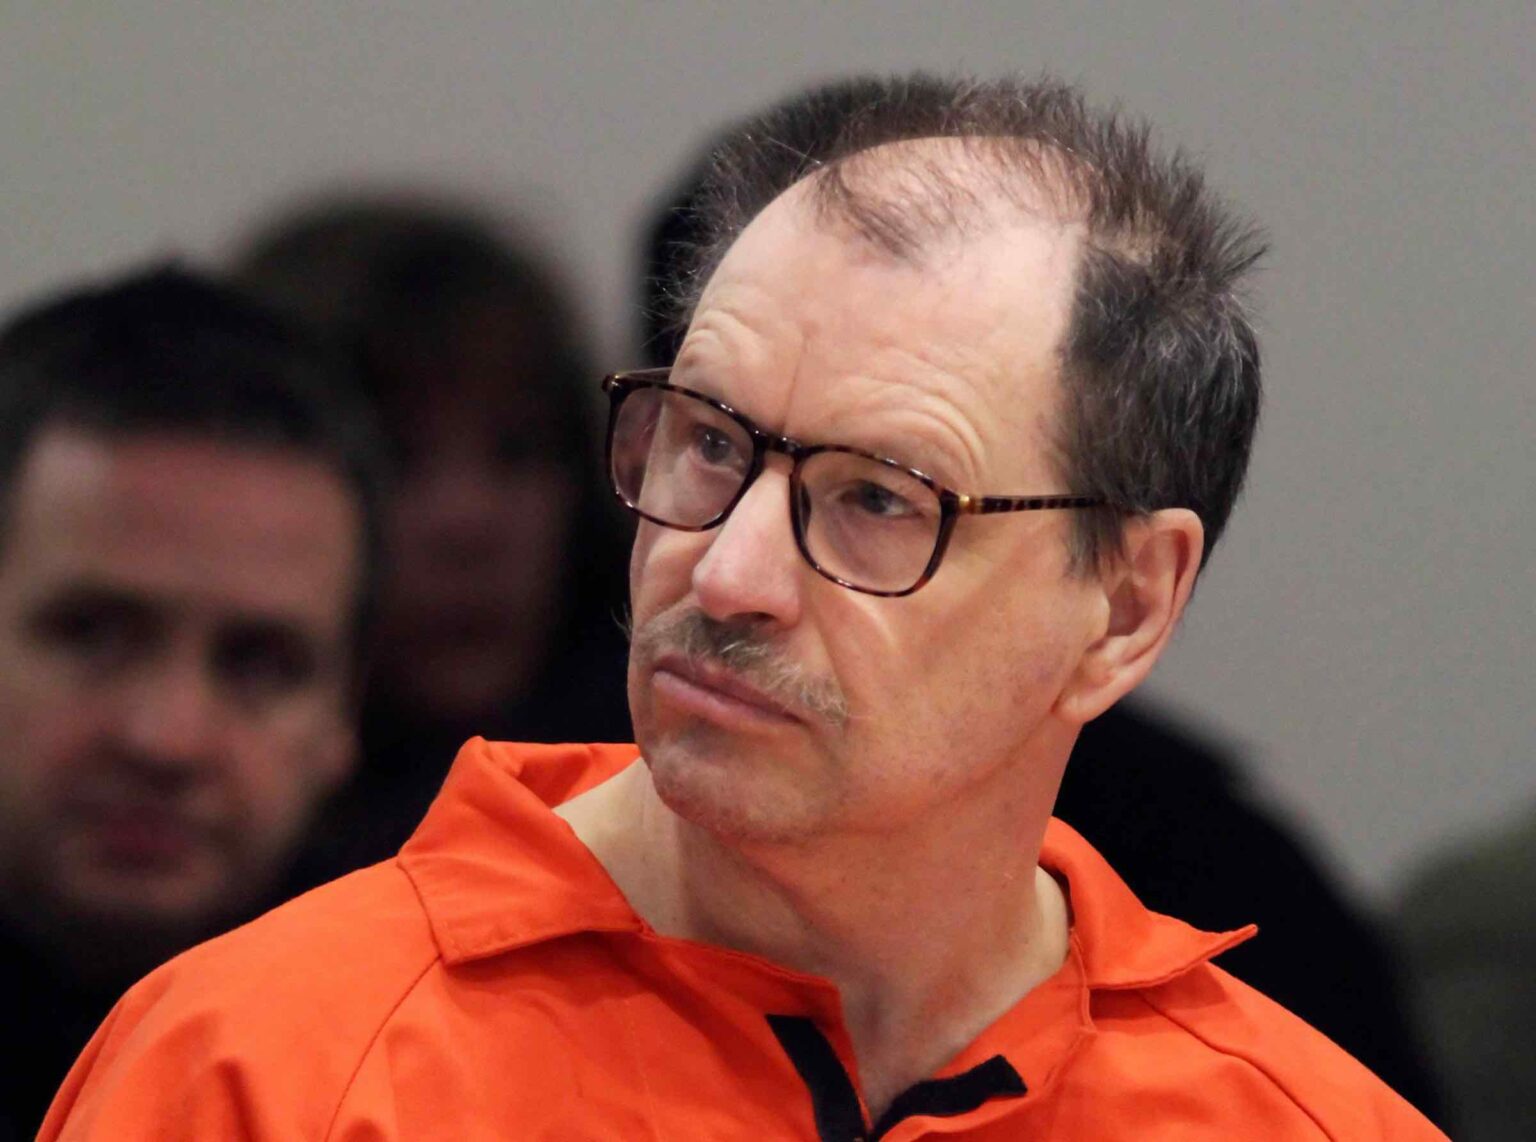 Serial killers are an obsession for any true crime stan worth their salt. Here's the haunting tale of Gary Ridgway the Green River Killer.